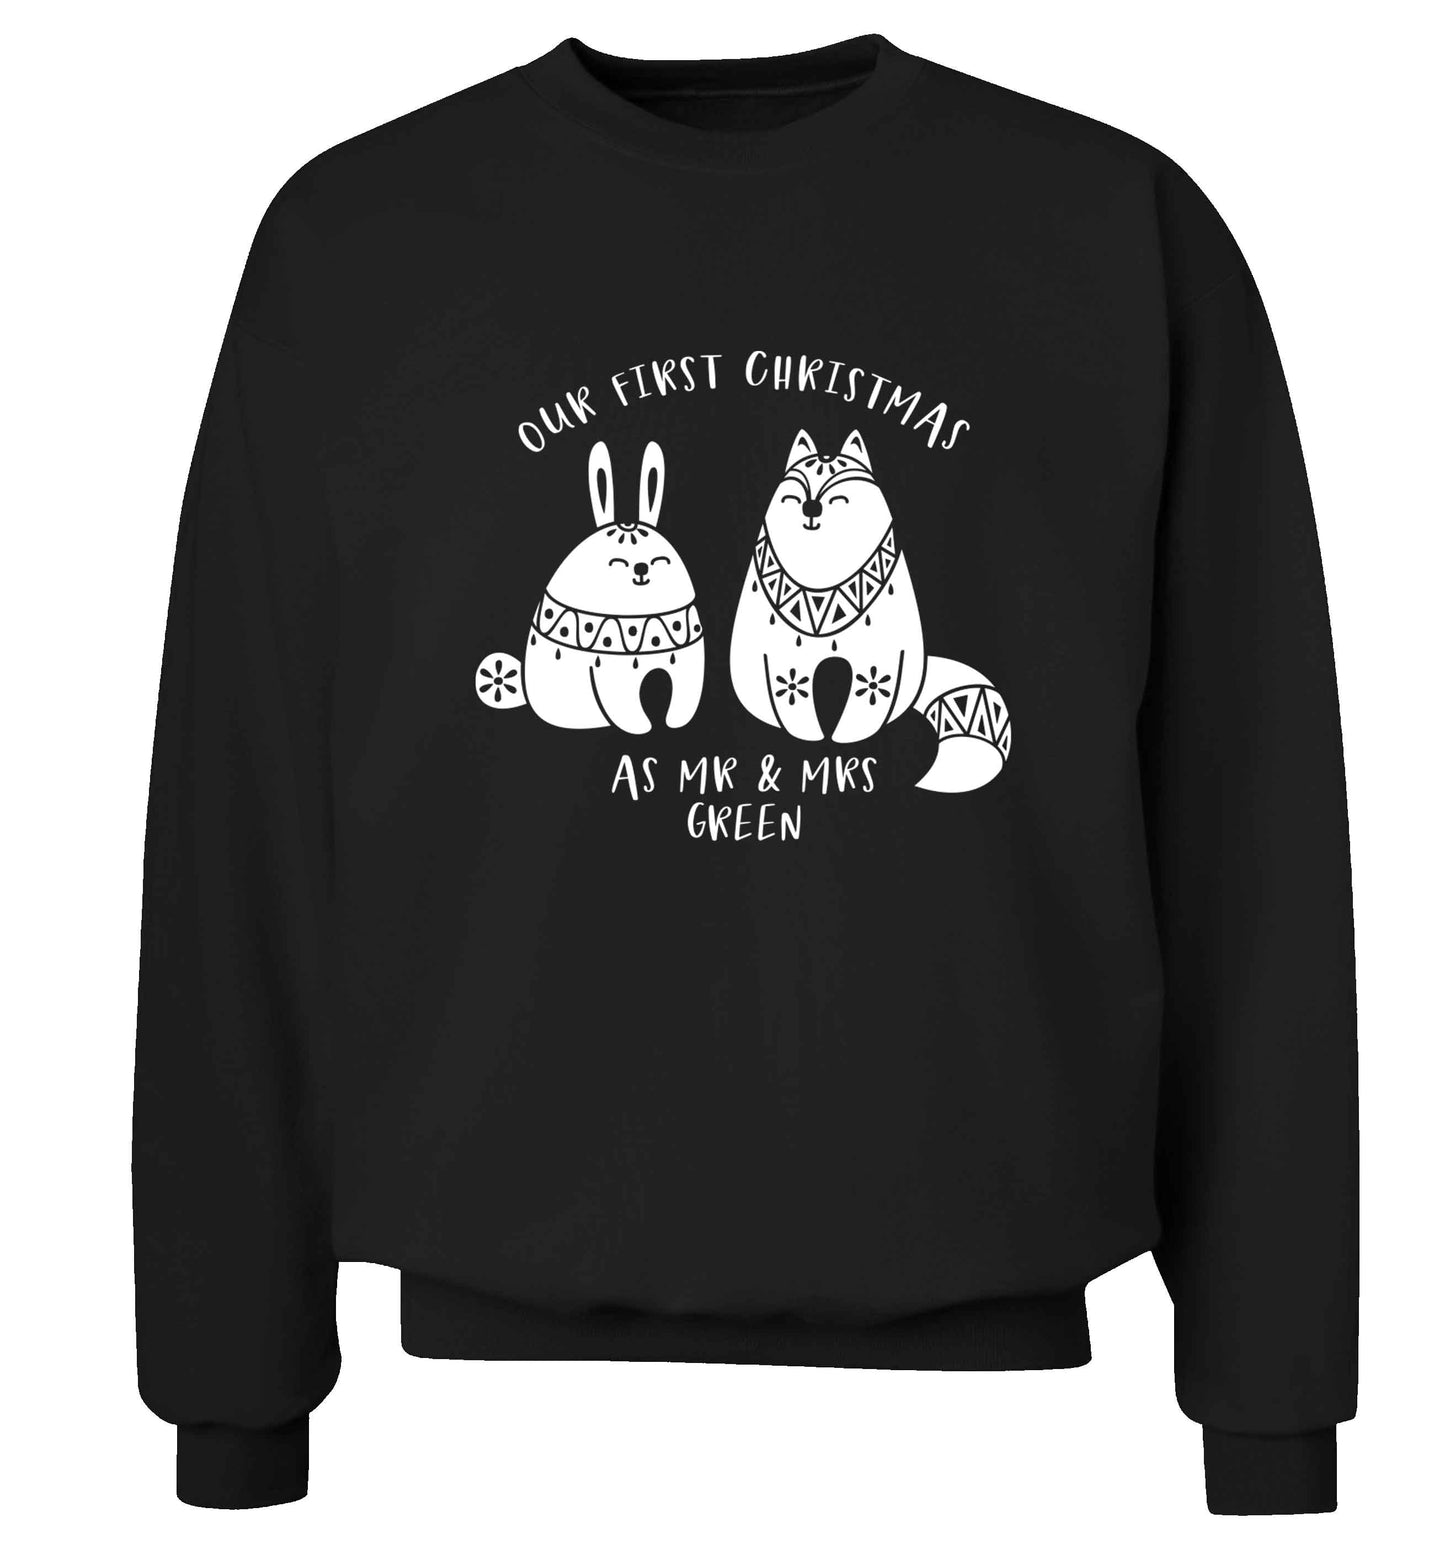 Our first Christmas as Mr & Mrs personalised Adult's unisex black Sweater 2XL